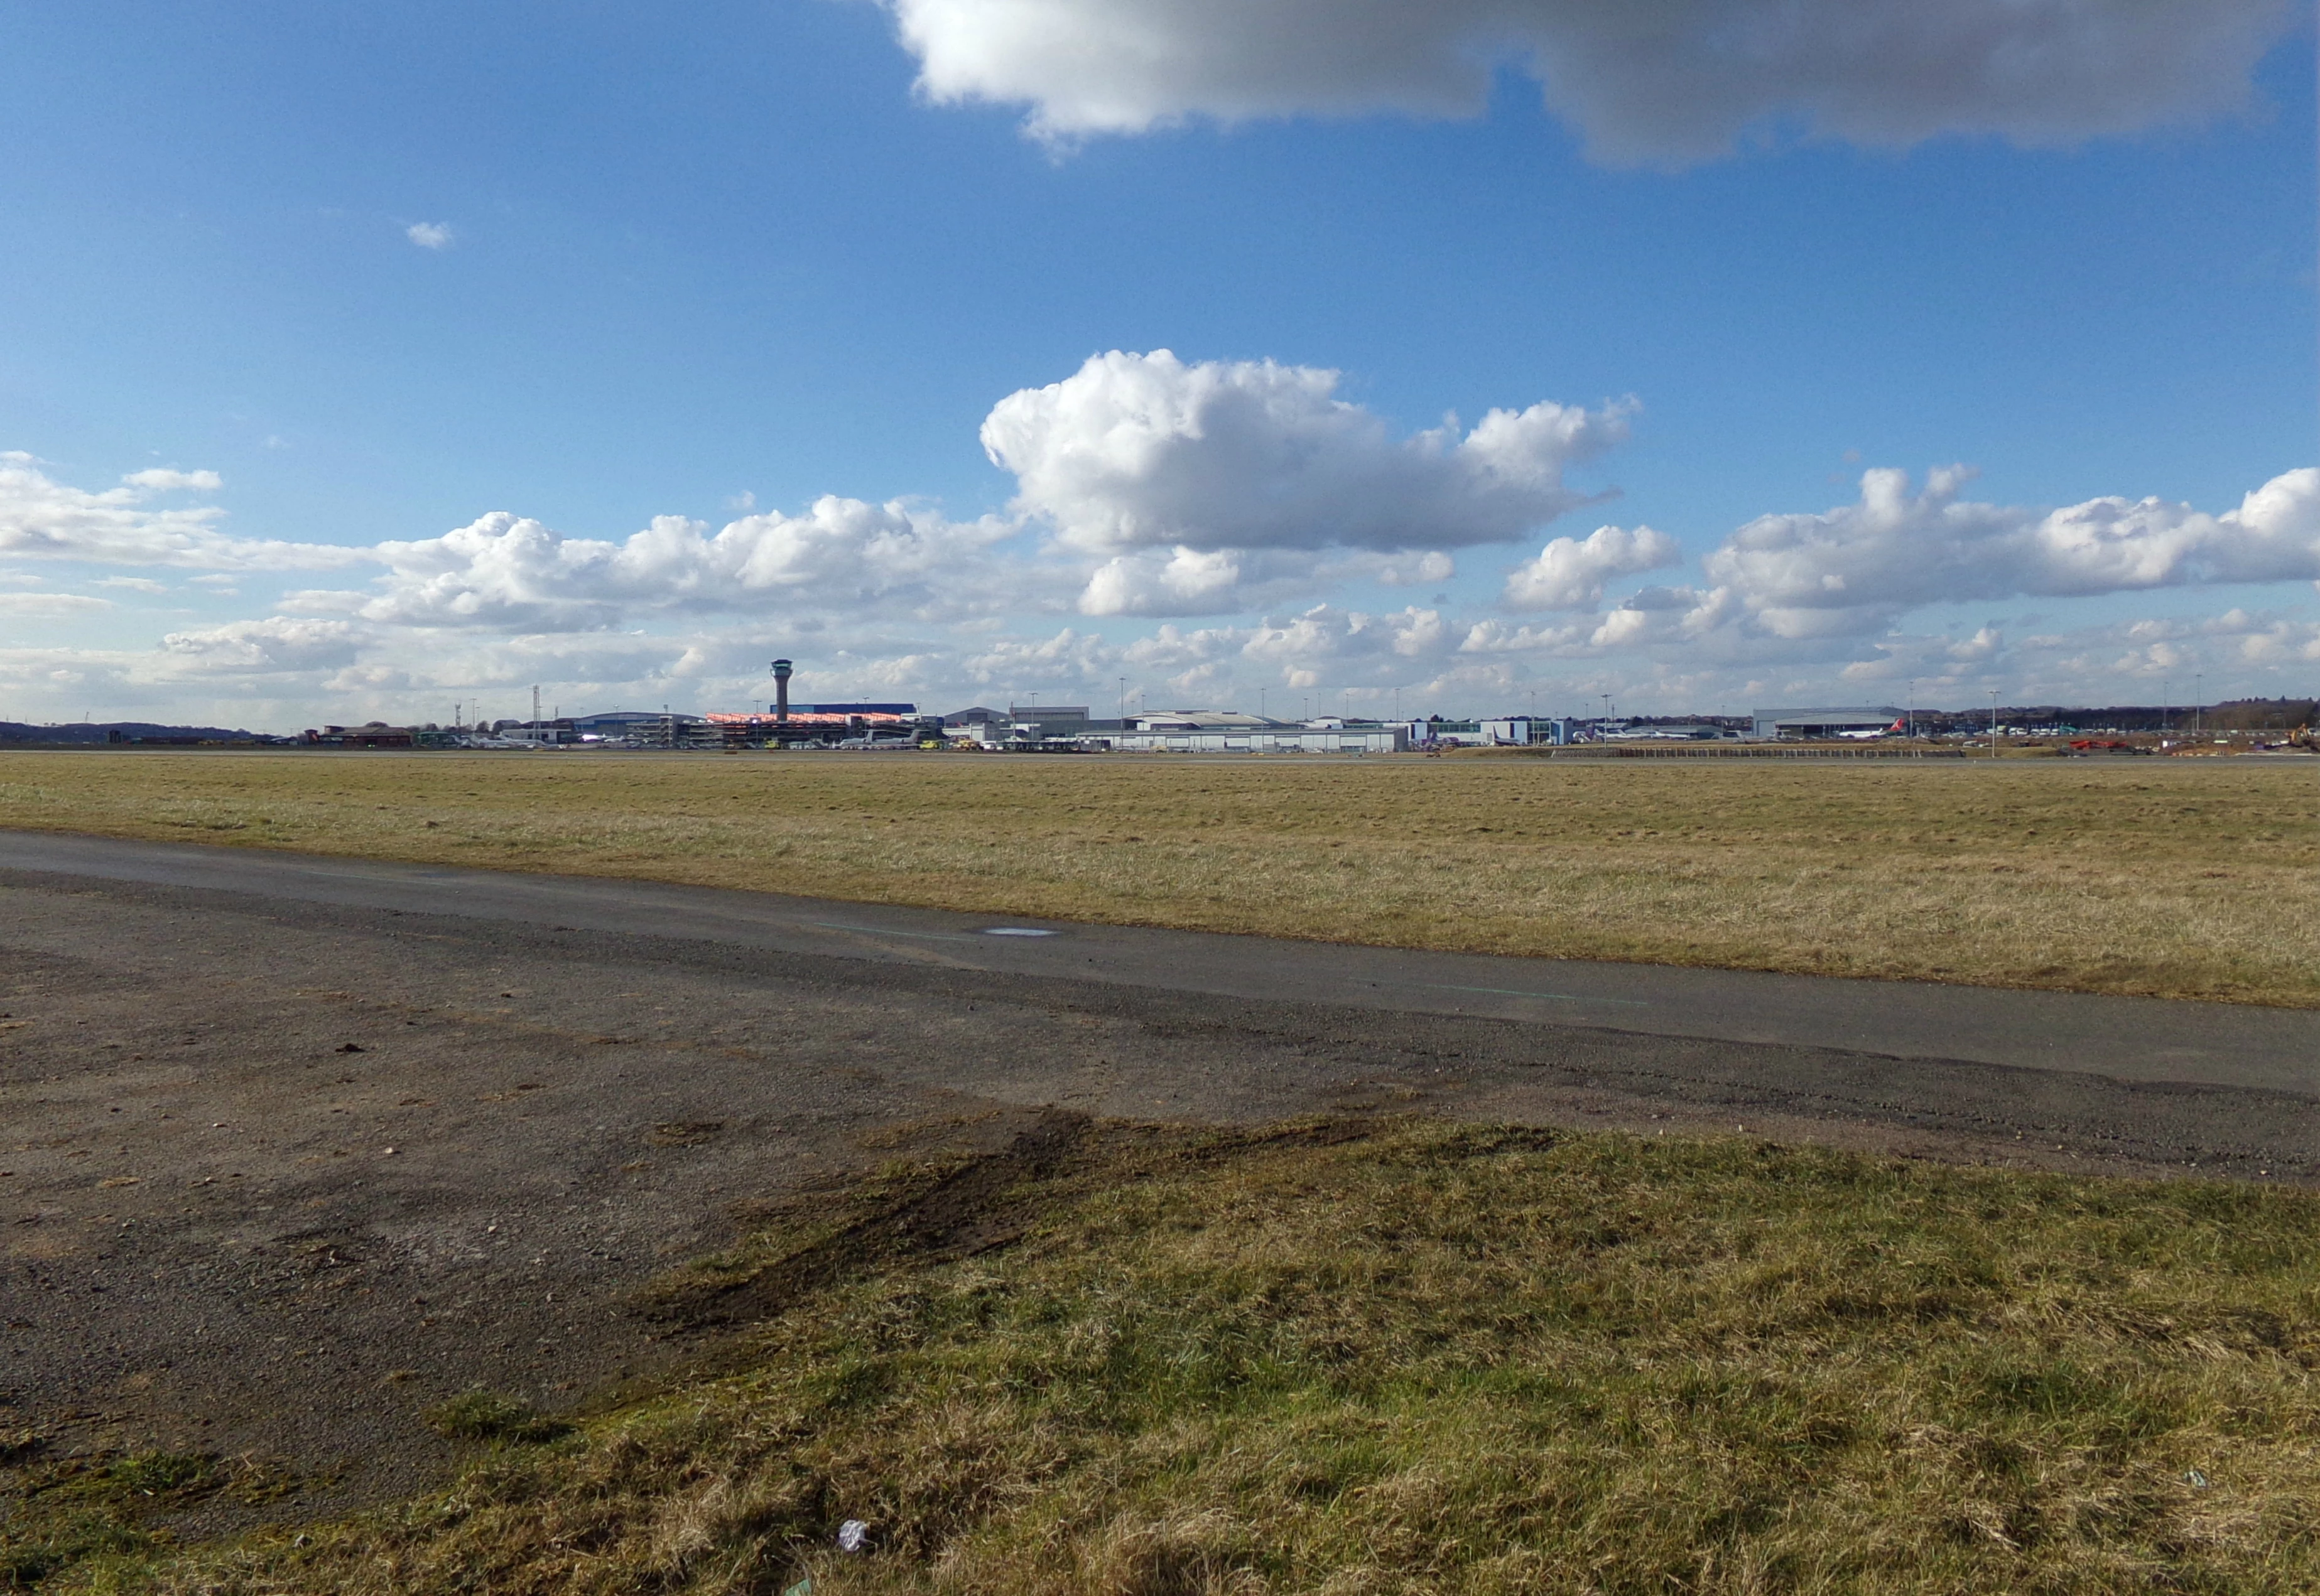 The airport's £160m redevelopment could unlock some air capacity for the South East